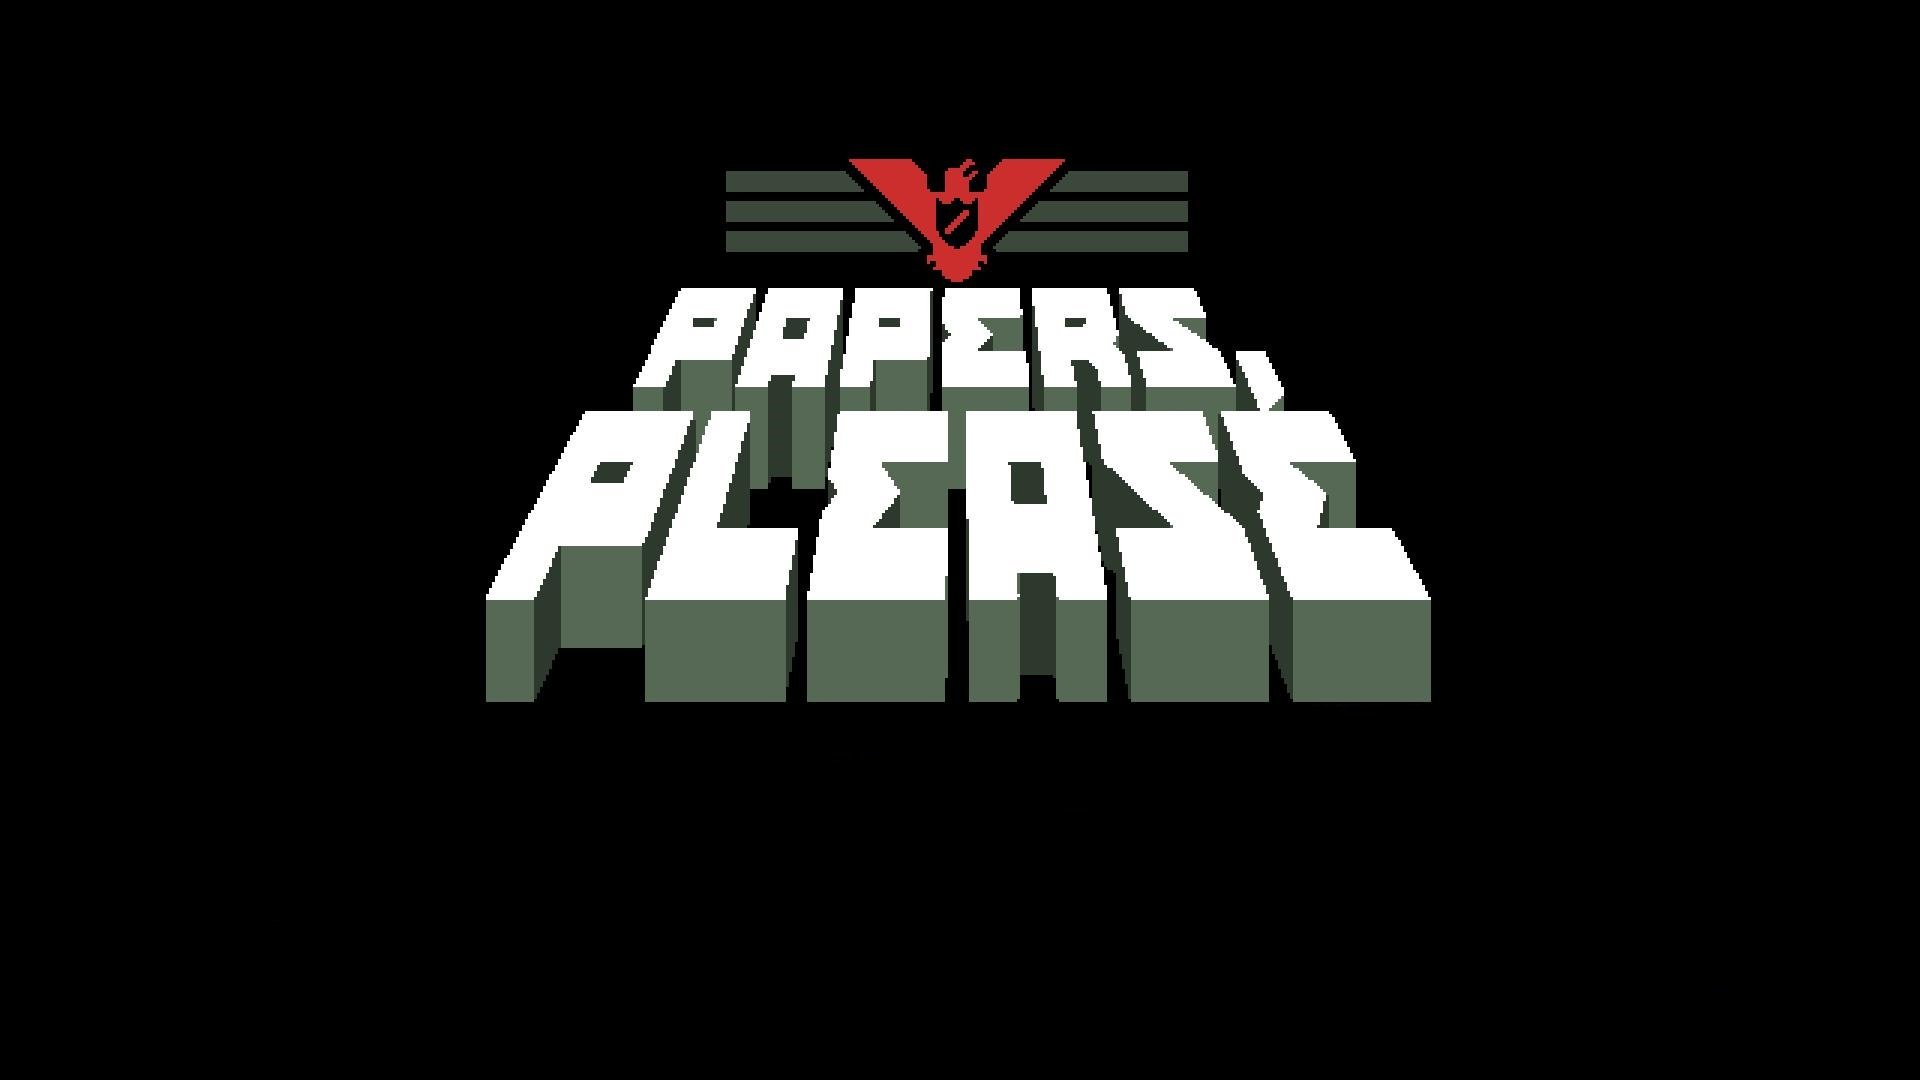 General 1920x1080 Papers Please video games simple background